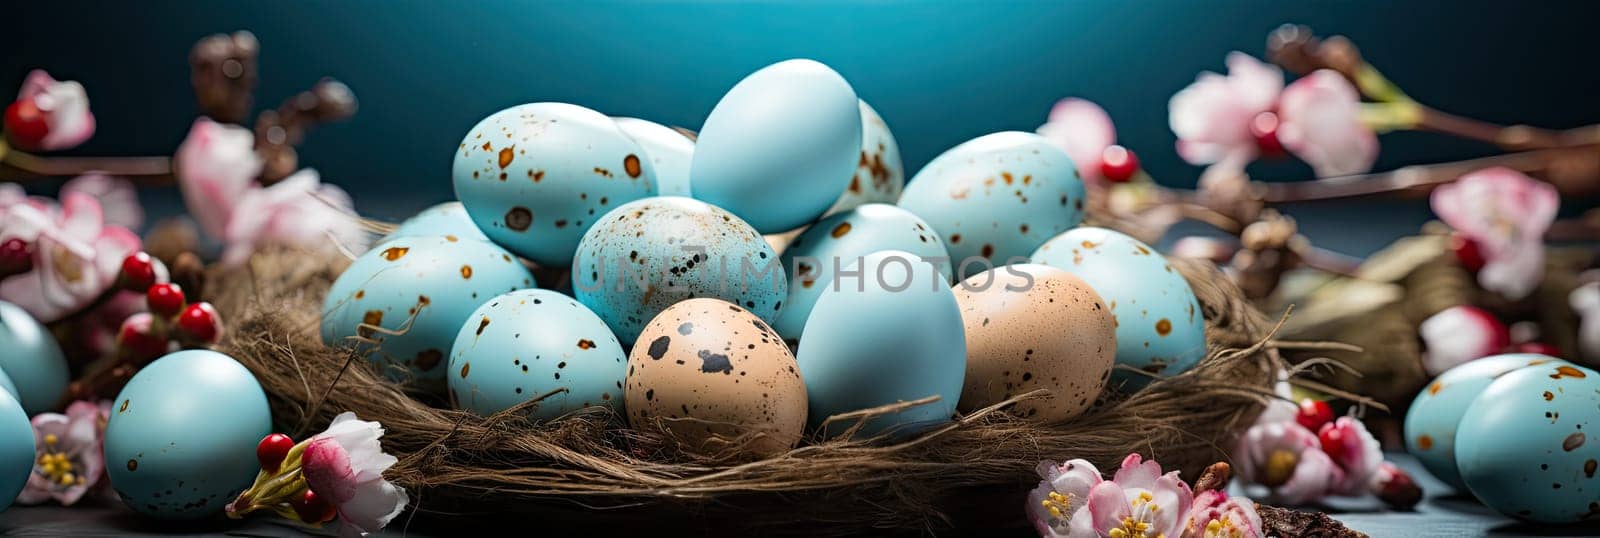 Colorful Easter eggs decorated with various patterns and designs, placed next to bright spring flowers, create a cheerful and festive spring picture in natural light.